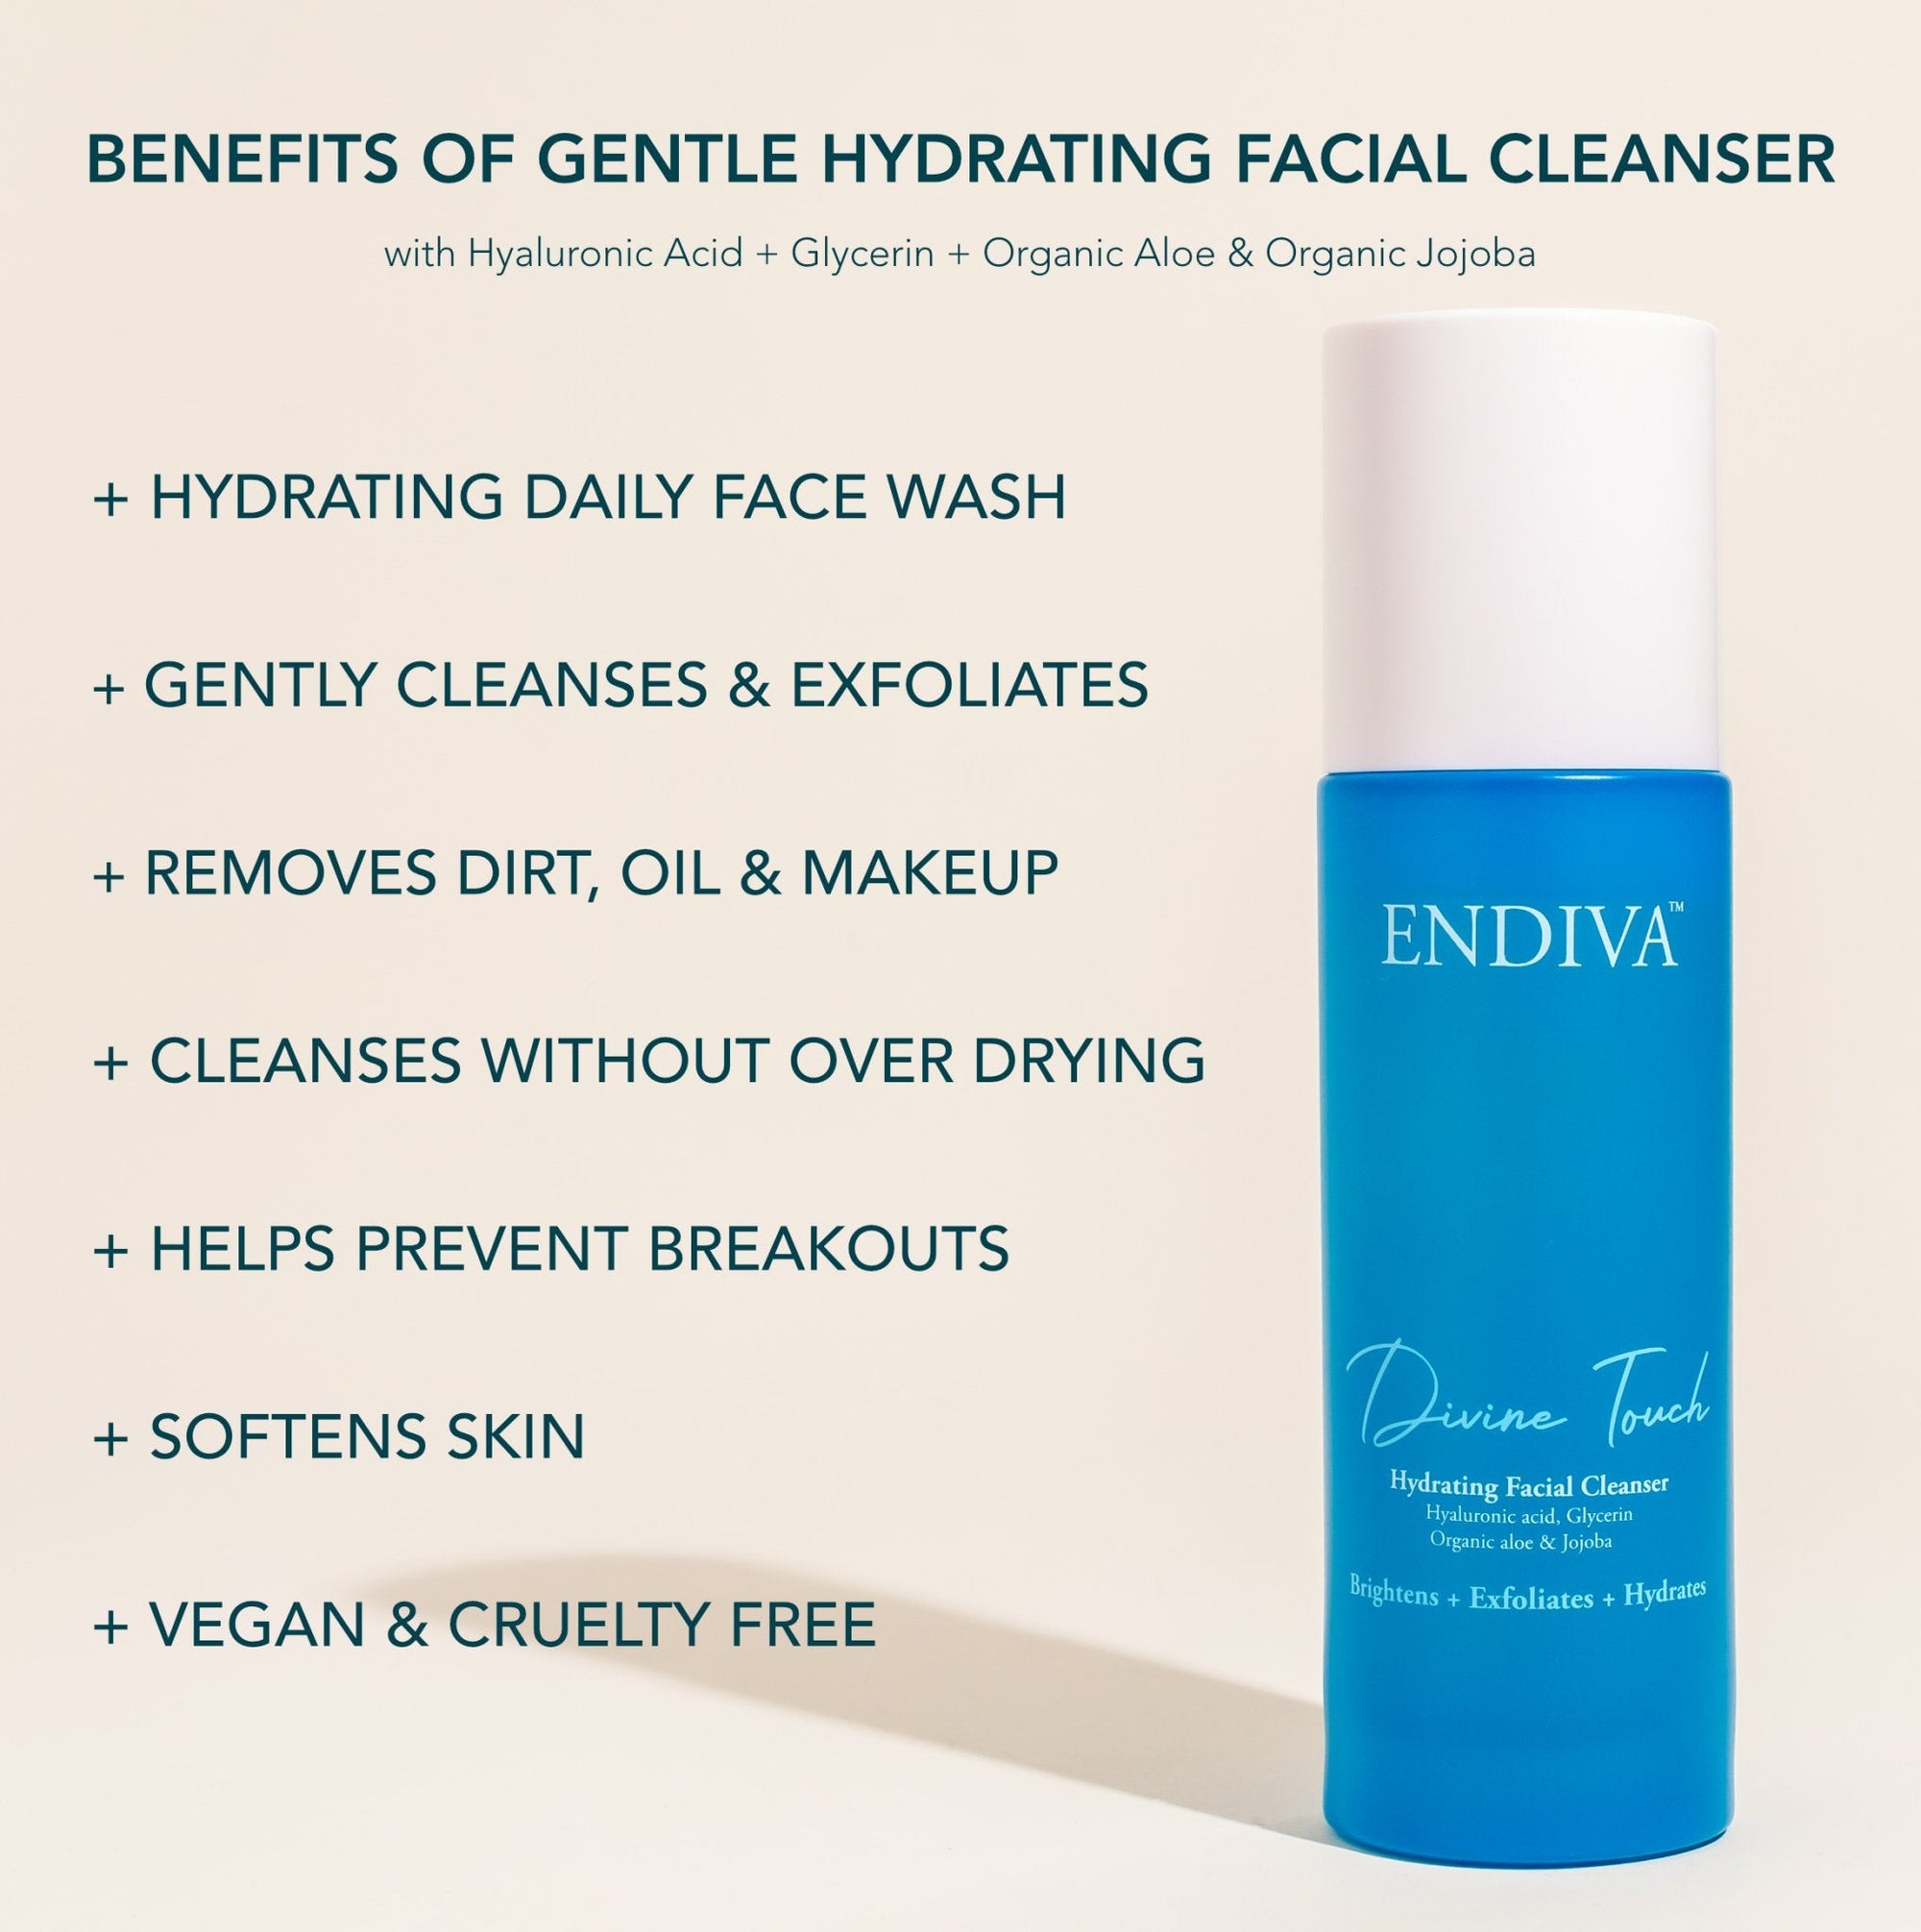 Divine Touch Hydrating Facial Cleanser - EndivaHydrating Facial Cleanser